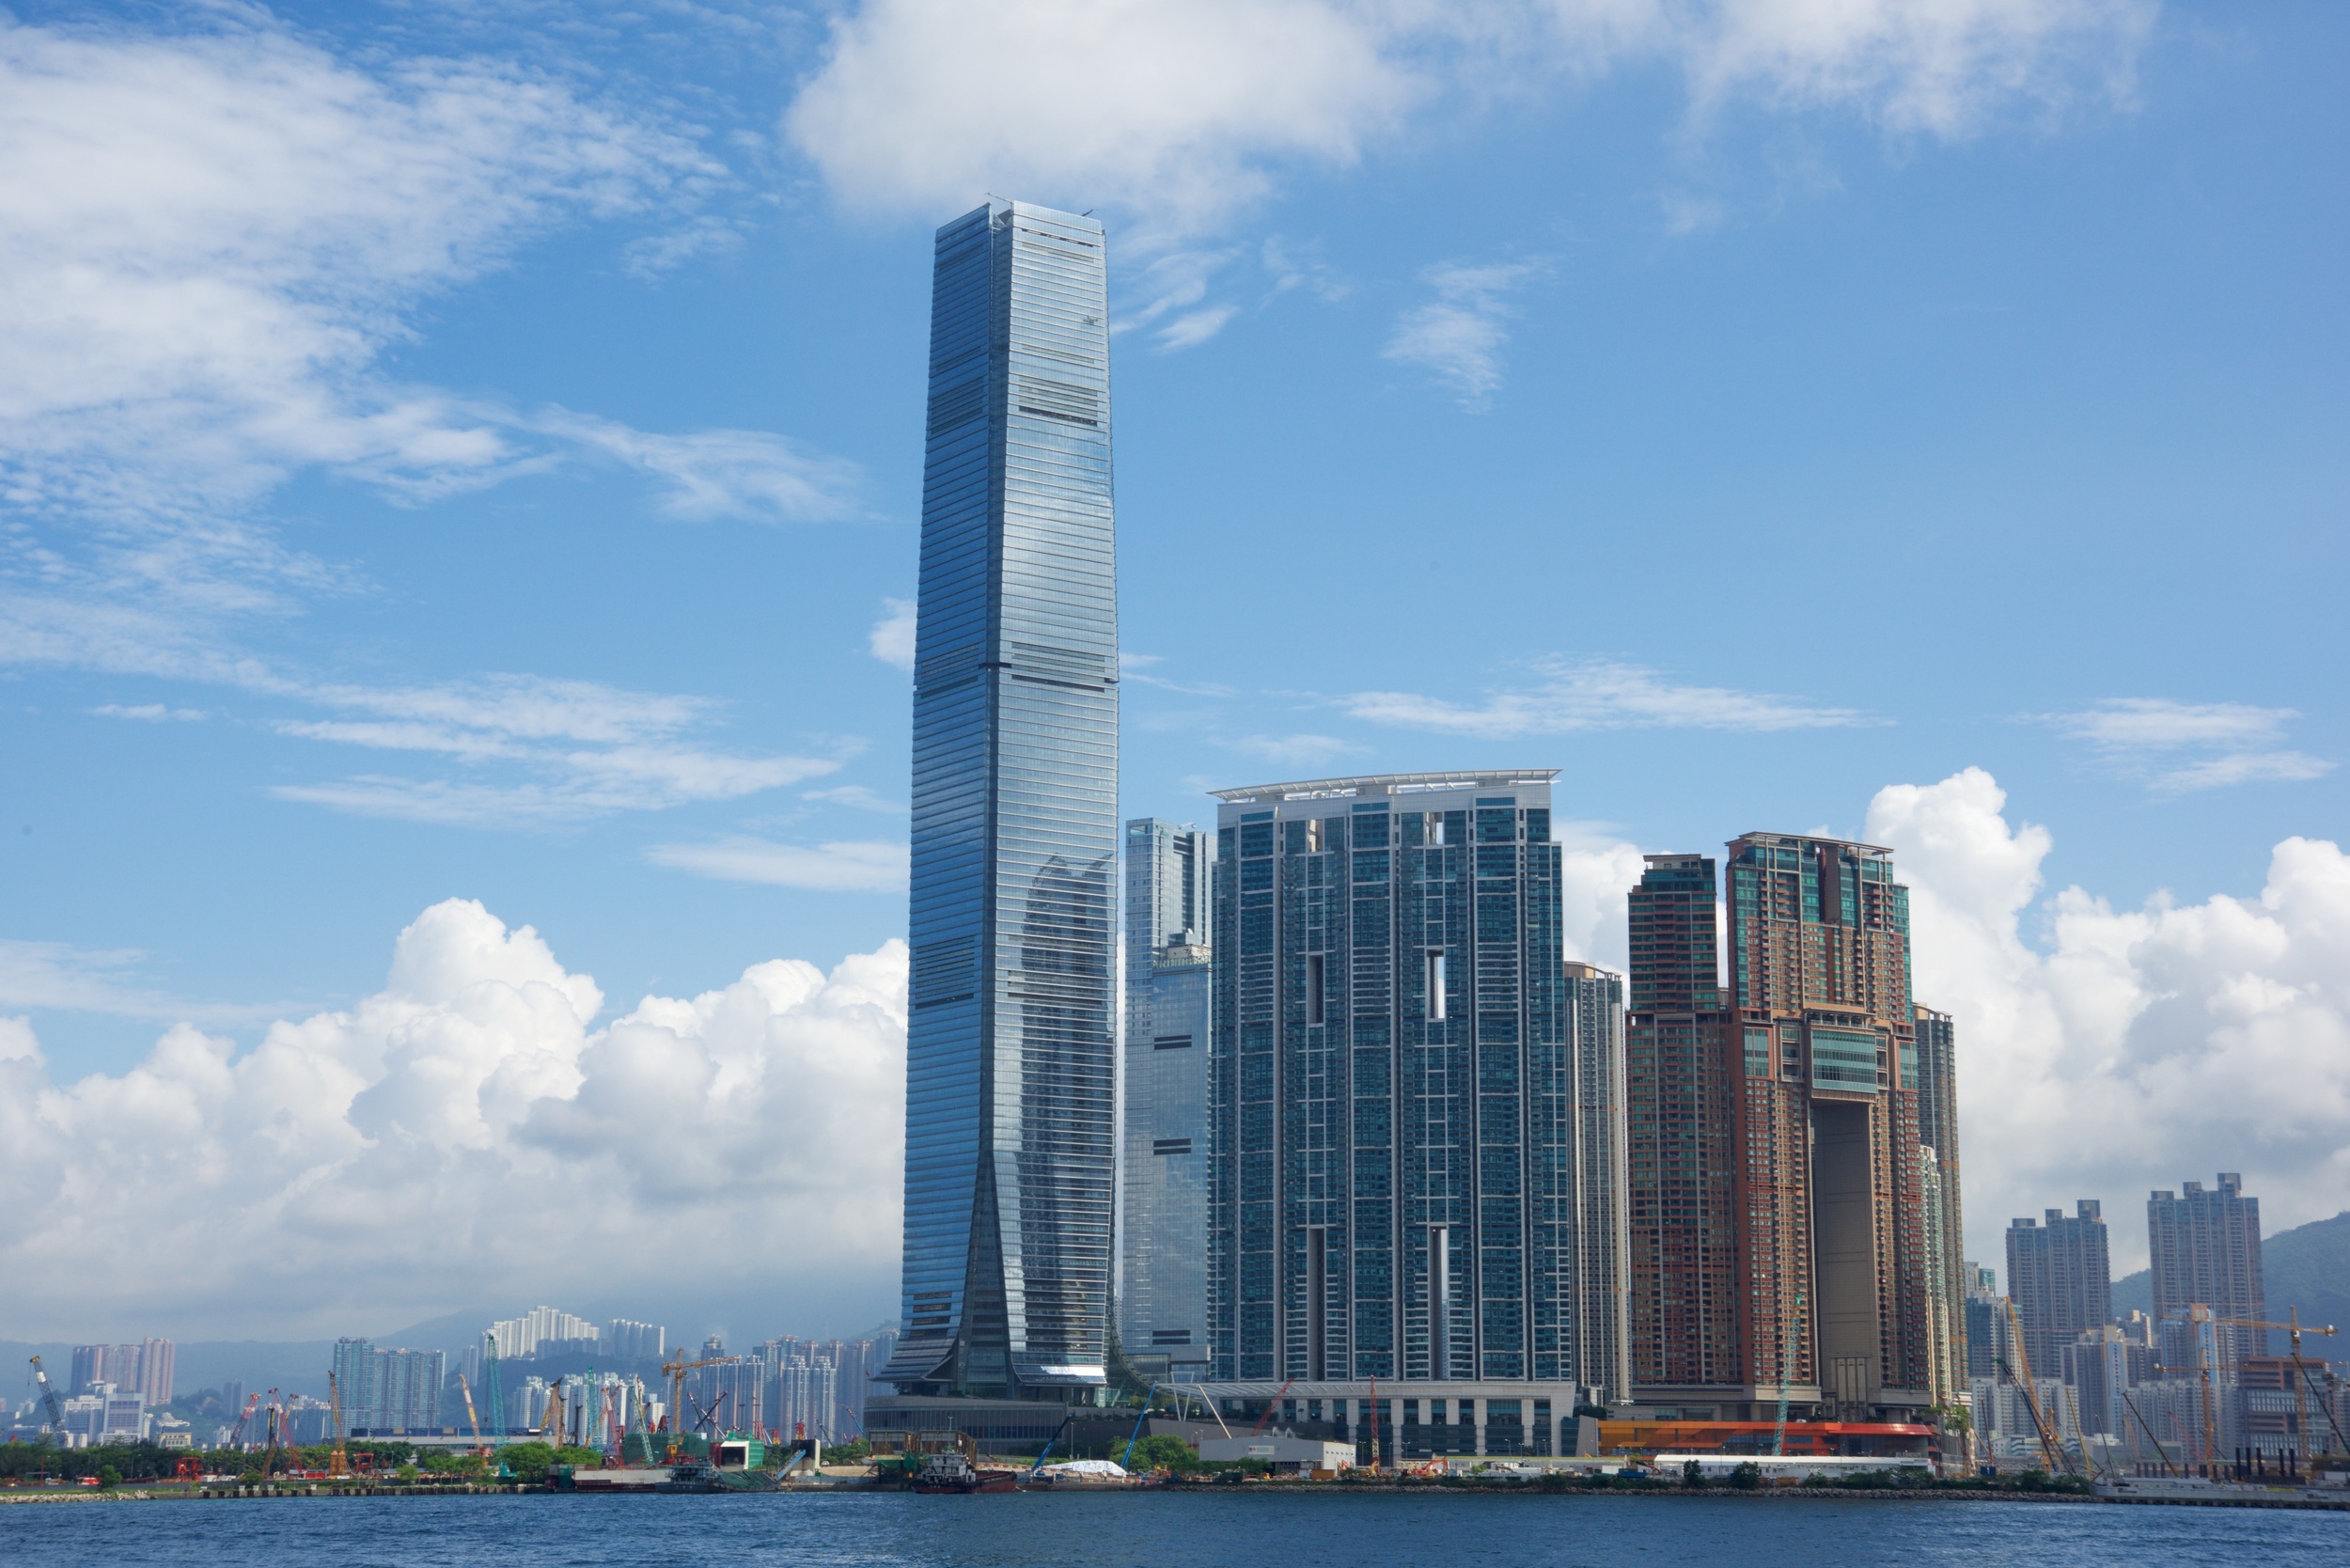  ational Commerce Centre (tallest building in HK), Hng Kongational Commerce Centre (tallest building in Hong Kong) 